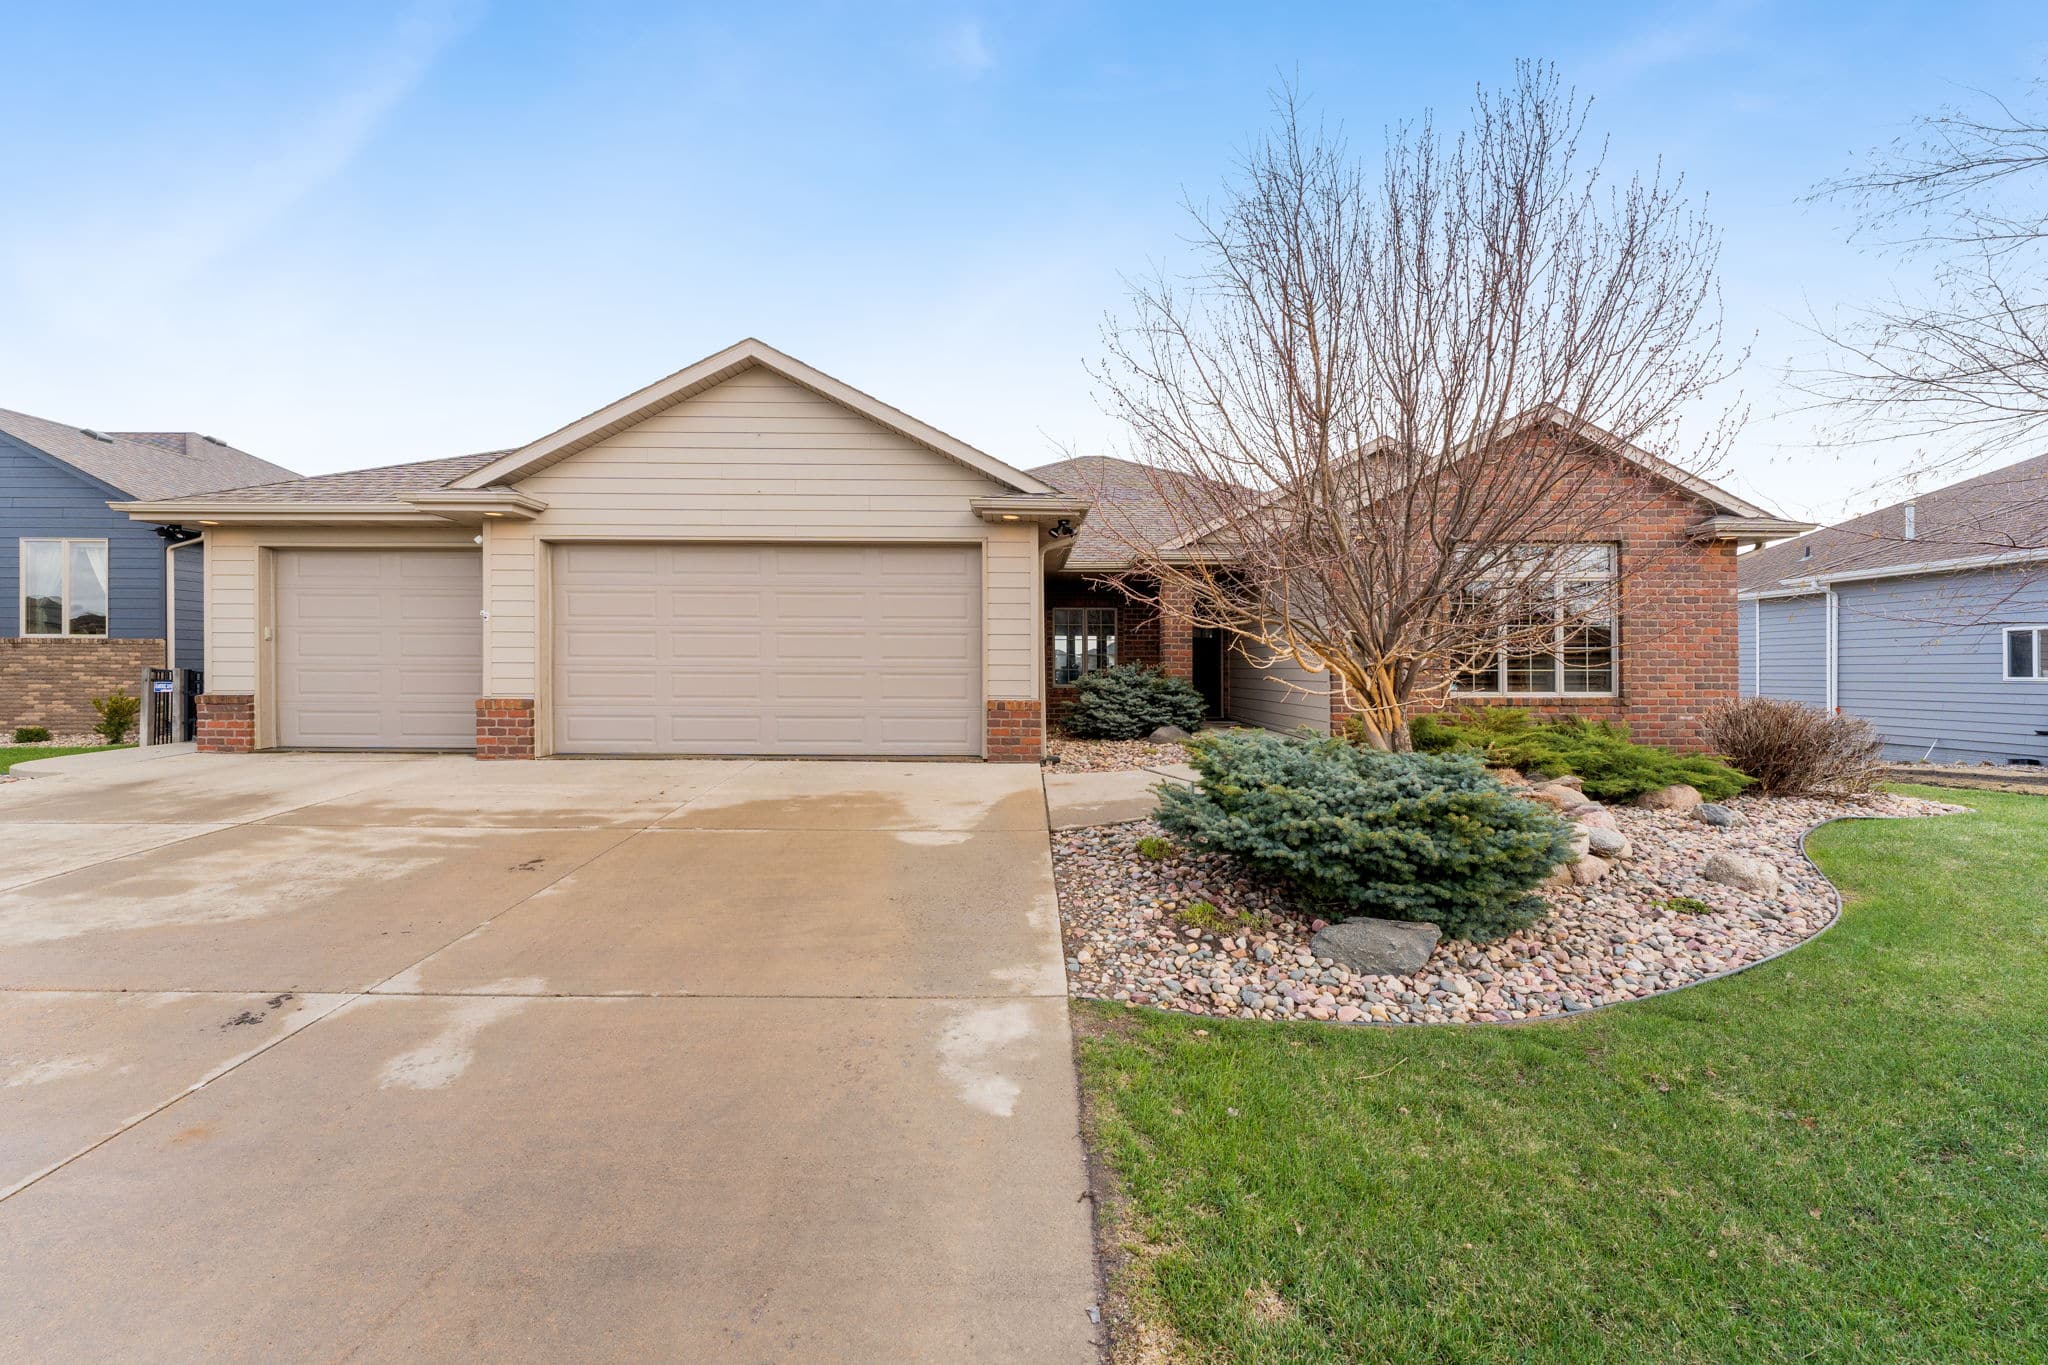 6-bedroom, fully accessible ranch home wows in south Sioux Falls